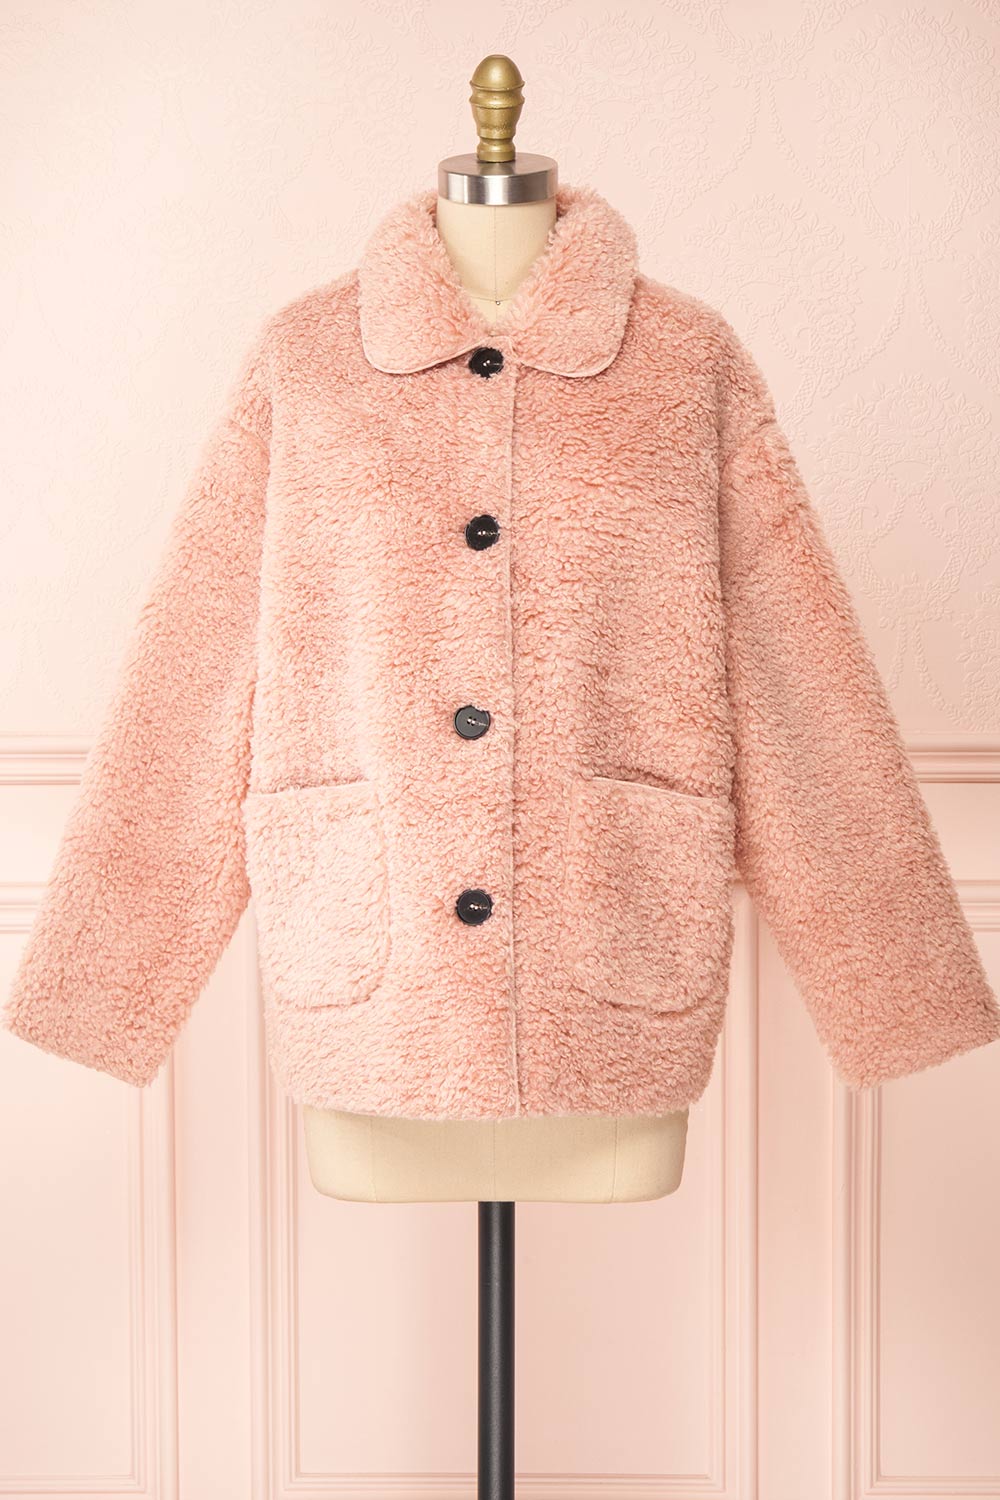 Kielo Pink Teddy Jacket | Boutique 1861 front view